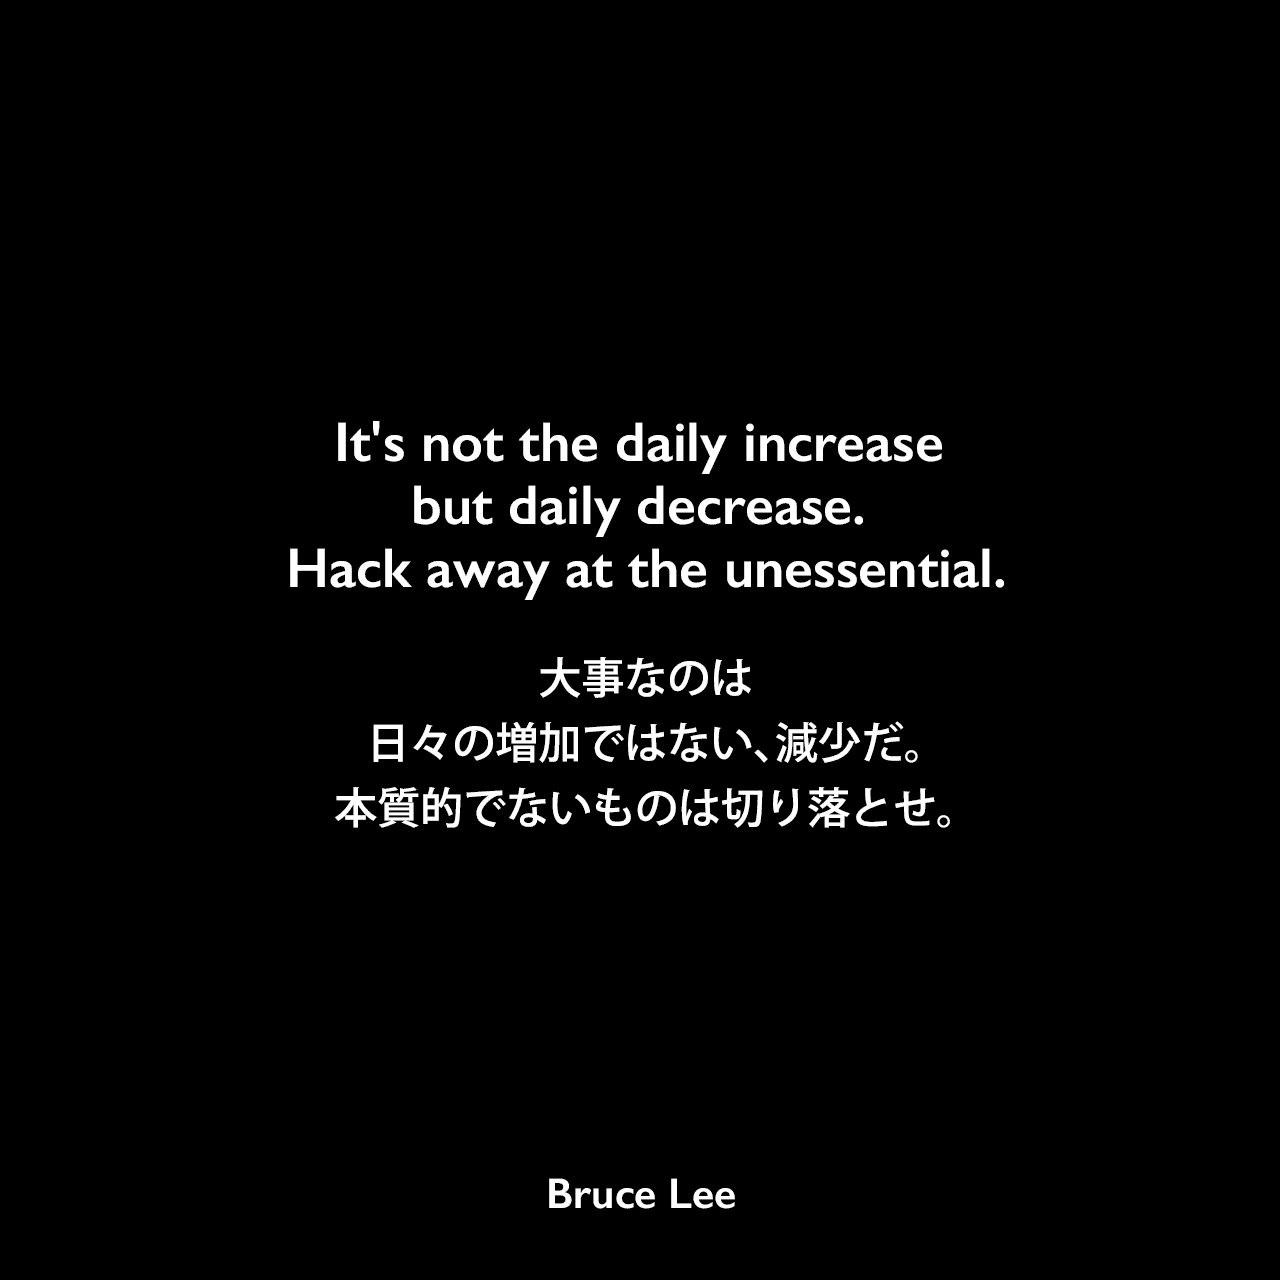 It's not the daily increase but daily decrease. Hack away at the unessential.大事なのは、日々の増加ではない、減少だ。本質的でないものは切り落とせ。Bruce Lee